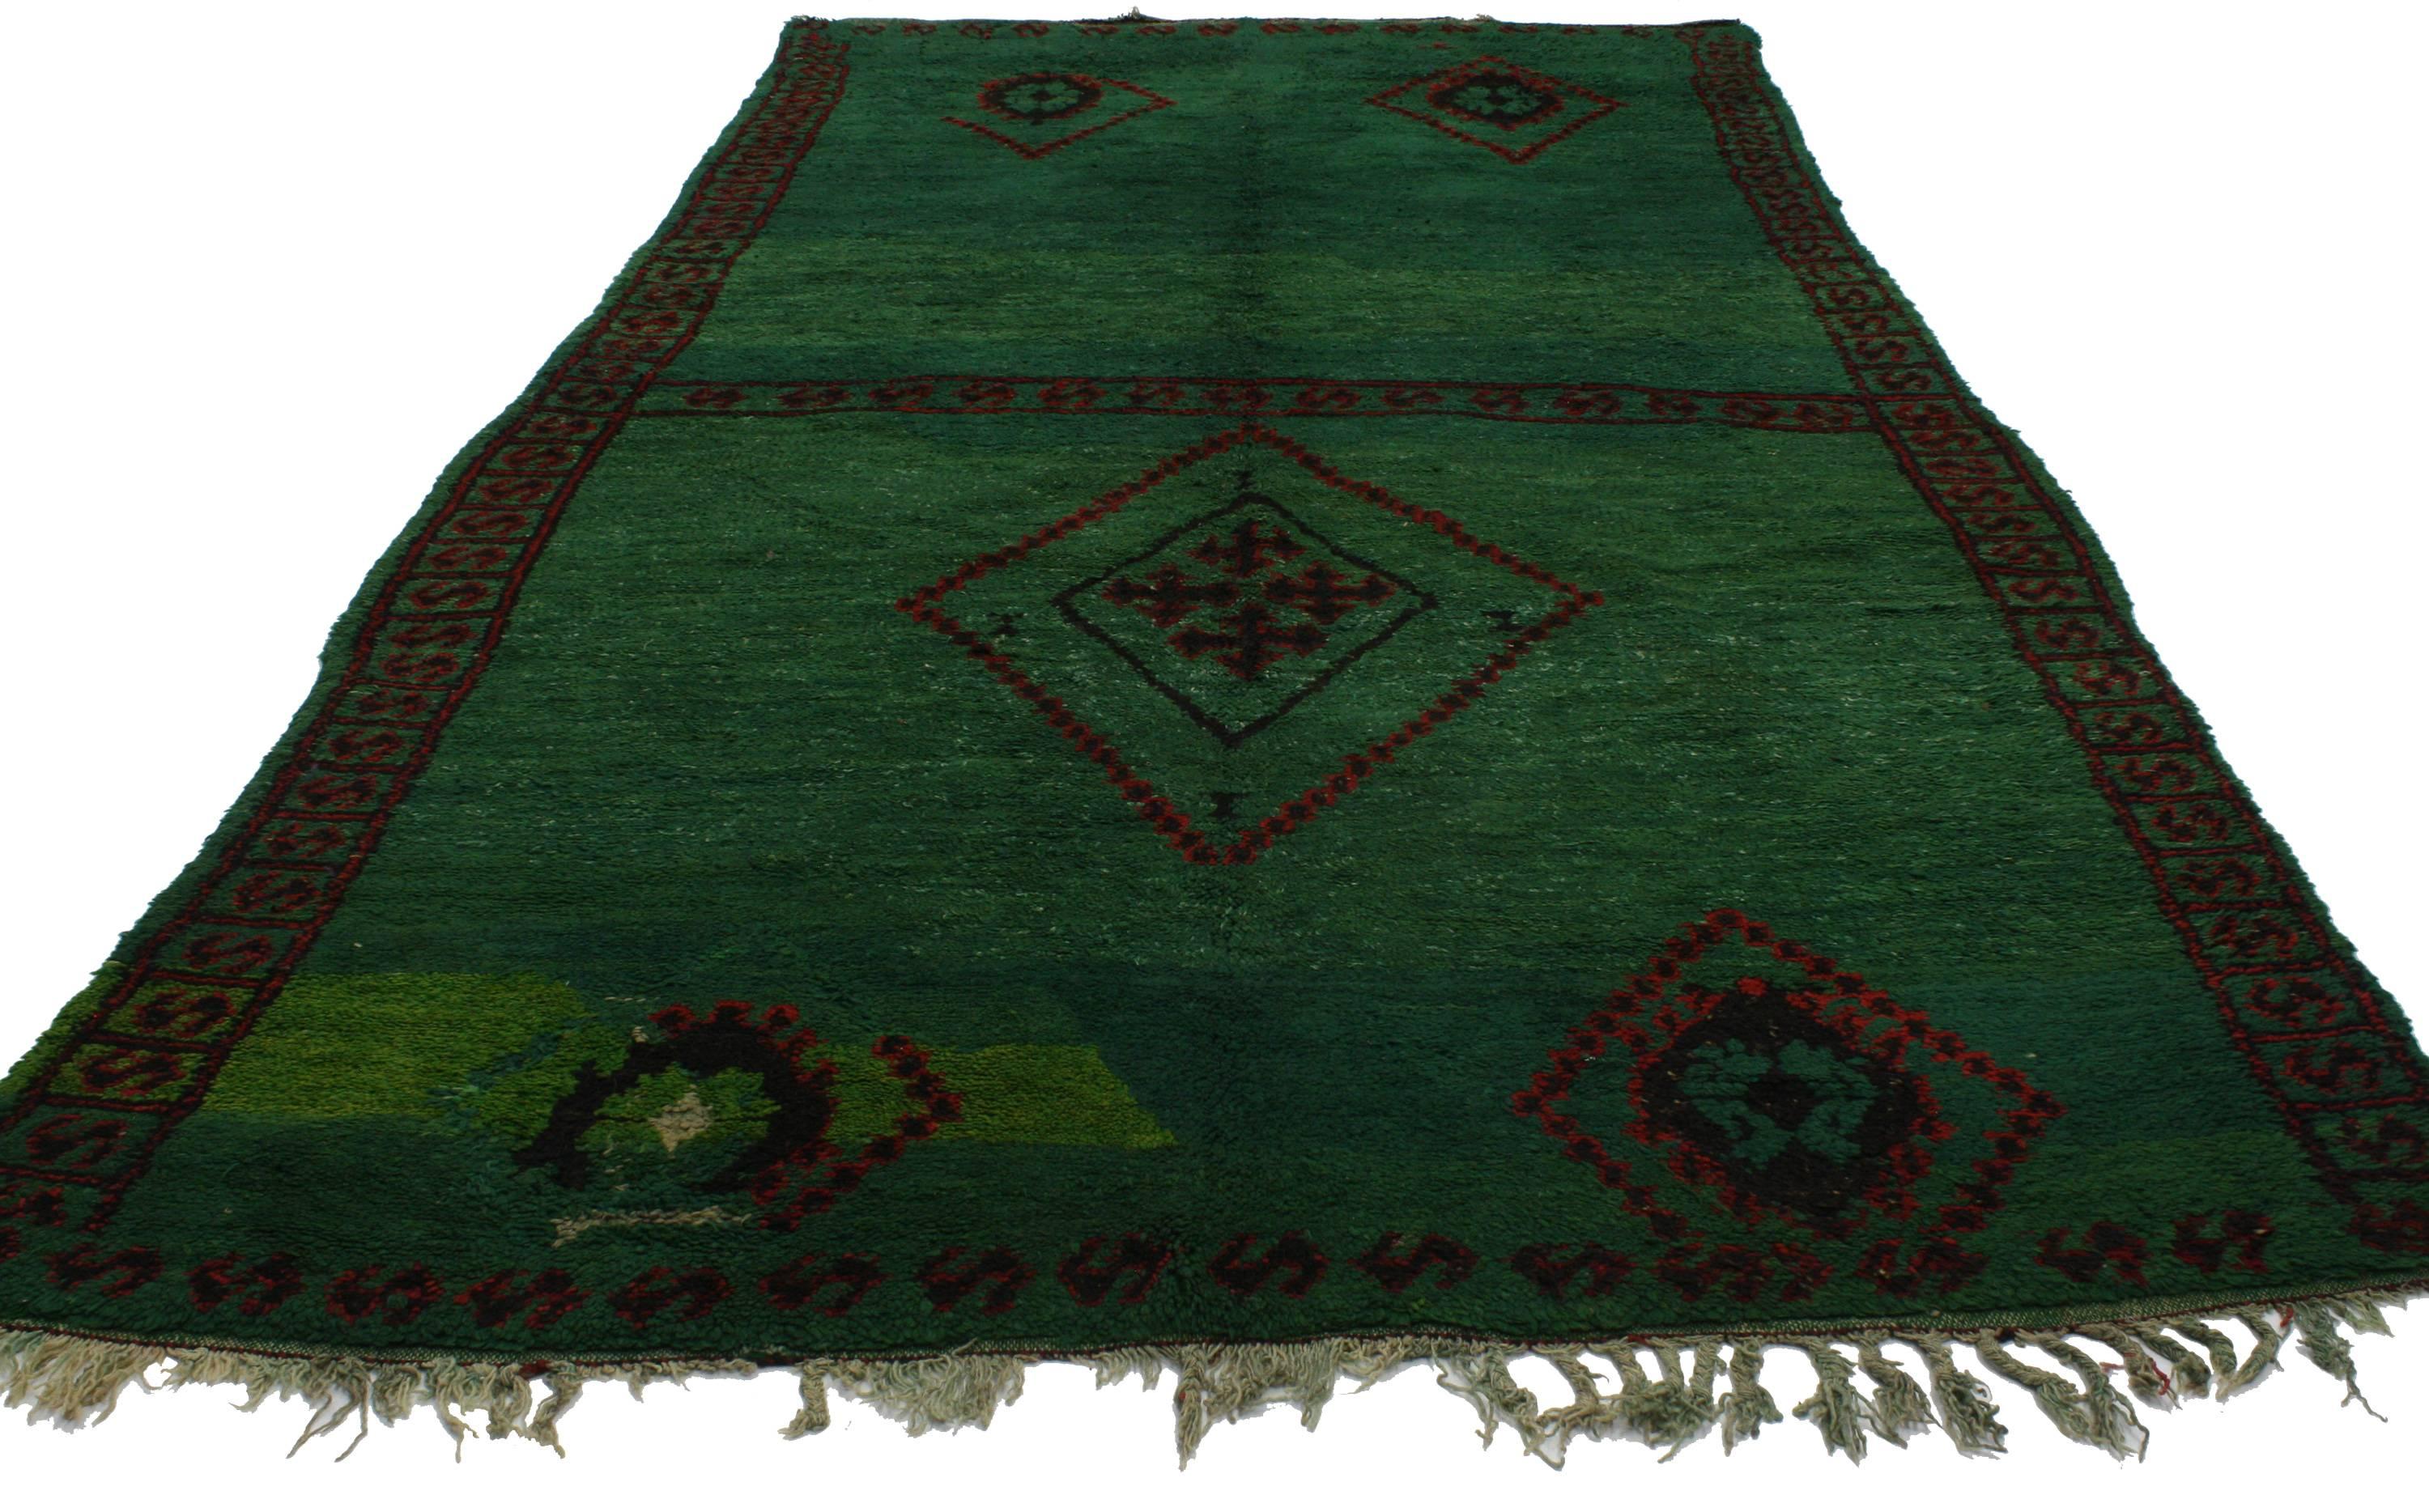 Hand-Knotted Green Beni M'guild Moroccan Rug in Malachite Color with Tribal Style